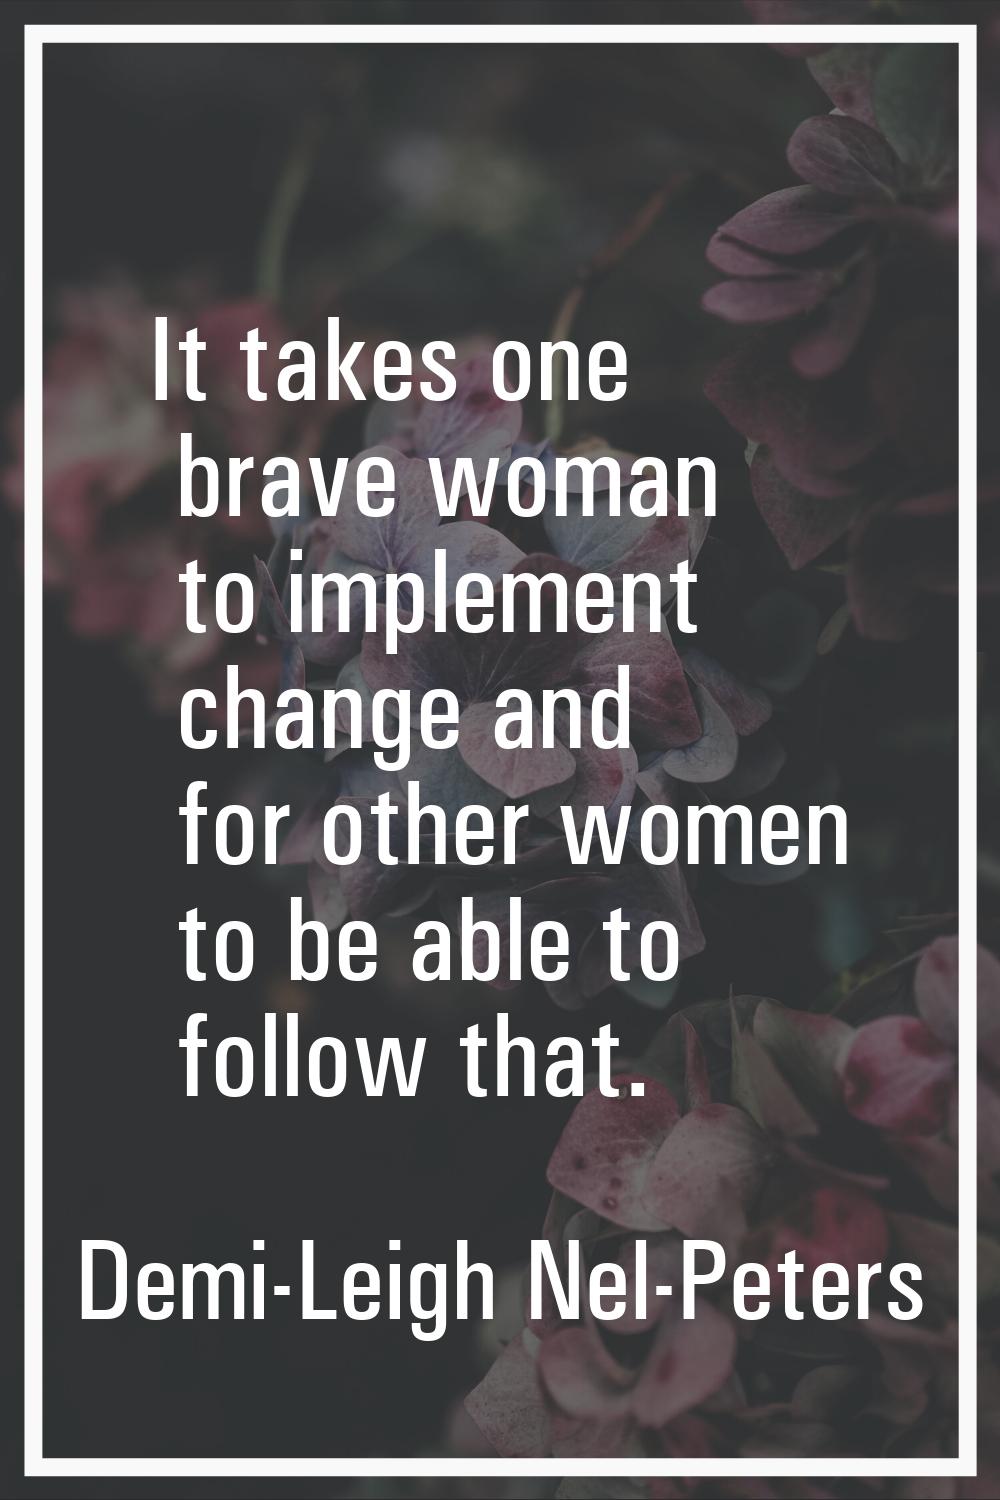 It takes one brave woman to implement change and for other women to be able to follow that.